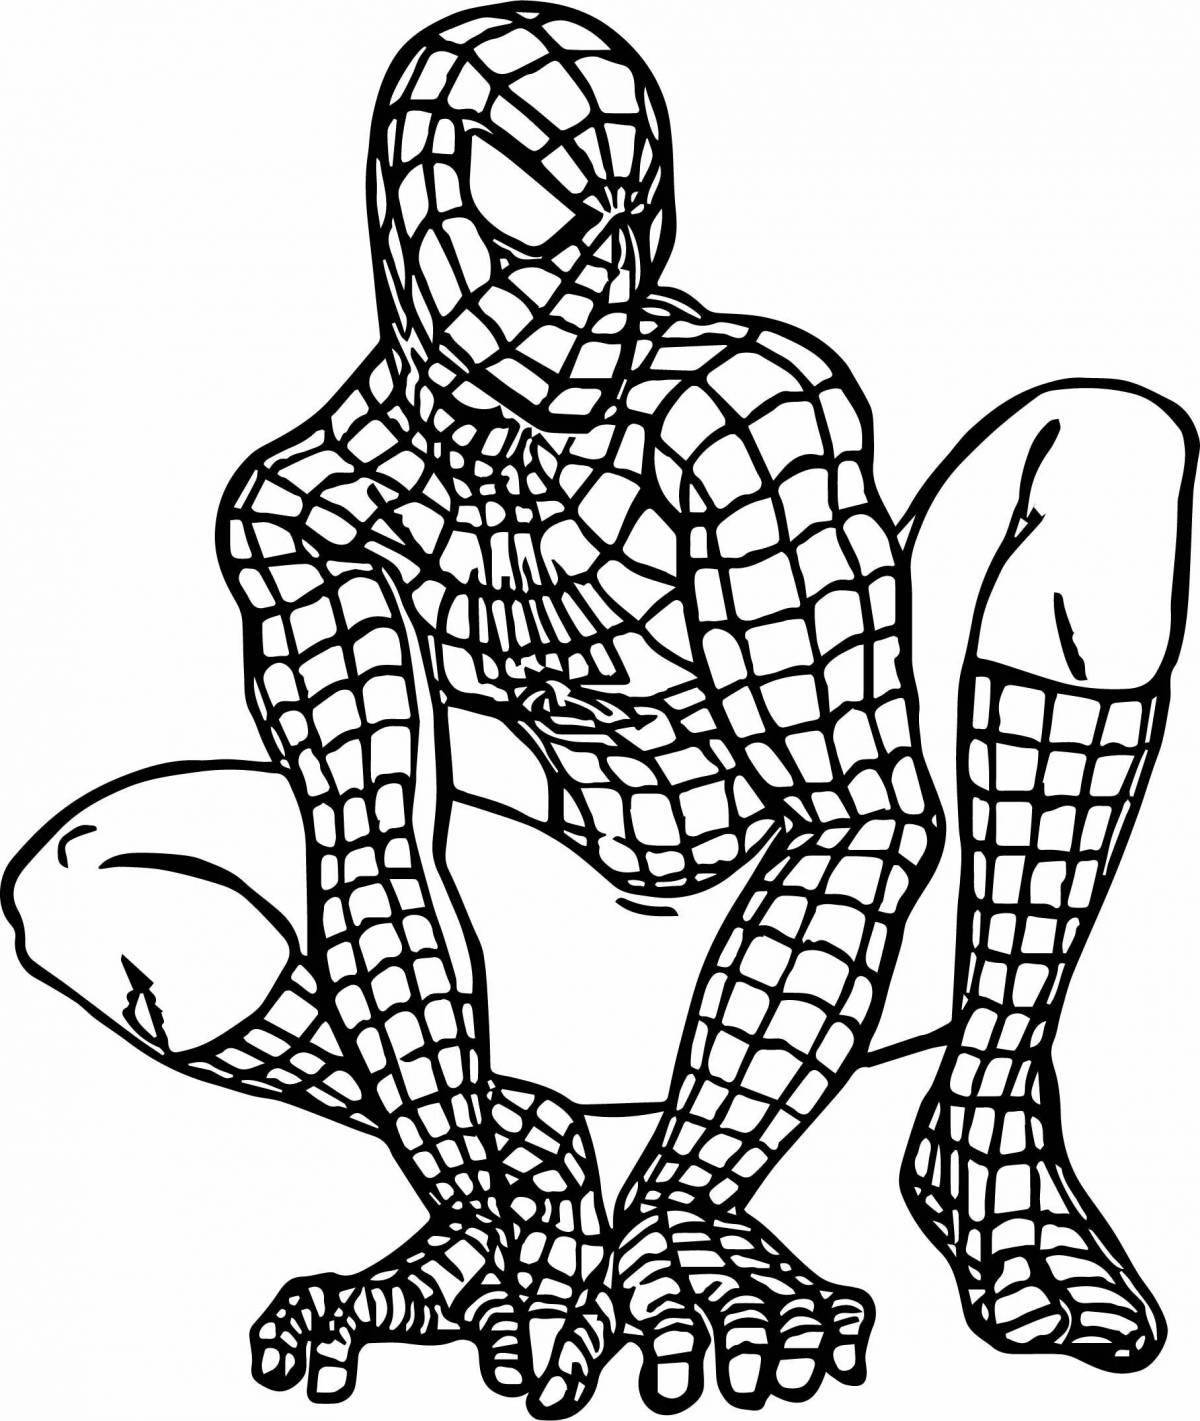 Coloring page brave spiderman